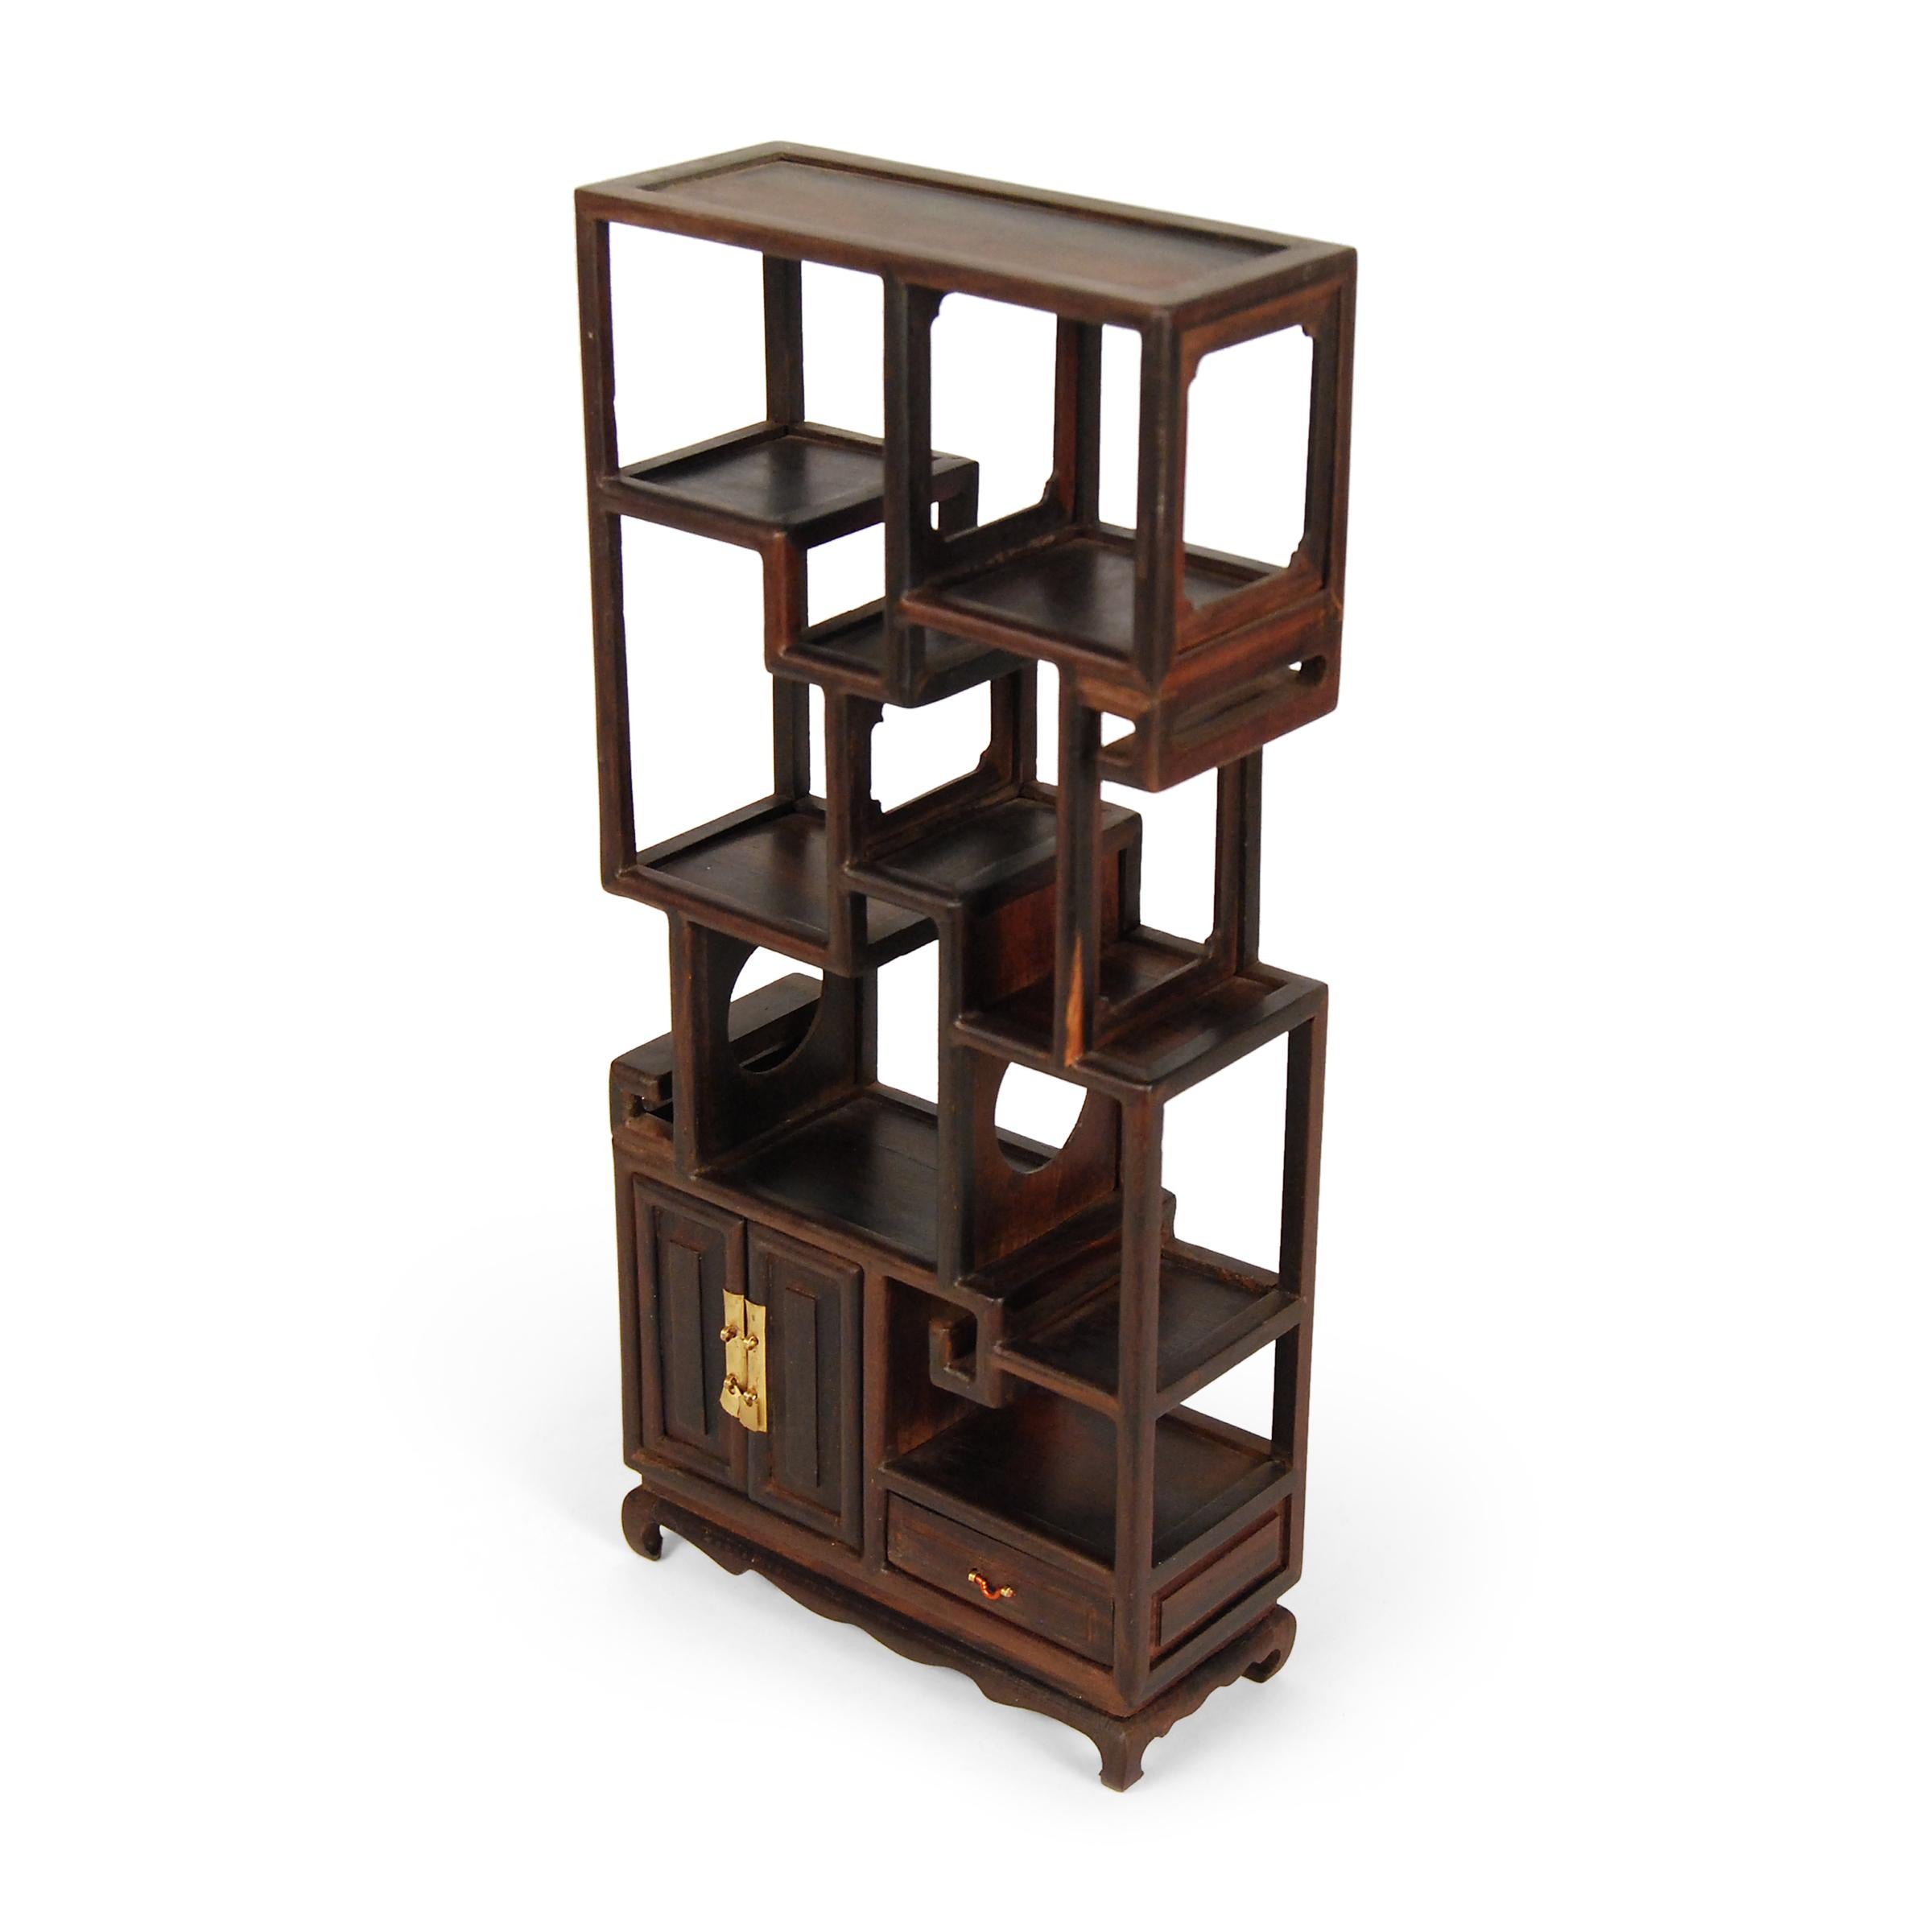 A full size bookcase with this level of workmanship and detail would be an incredible find, but this beautiful piece of furniture—at only ten inches tall—is perfectly constructed down to the tiniest minutia. Crafted of a dark hardwood, the small